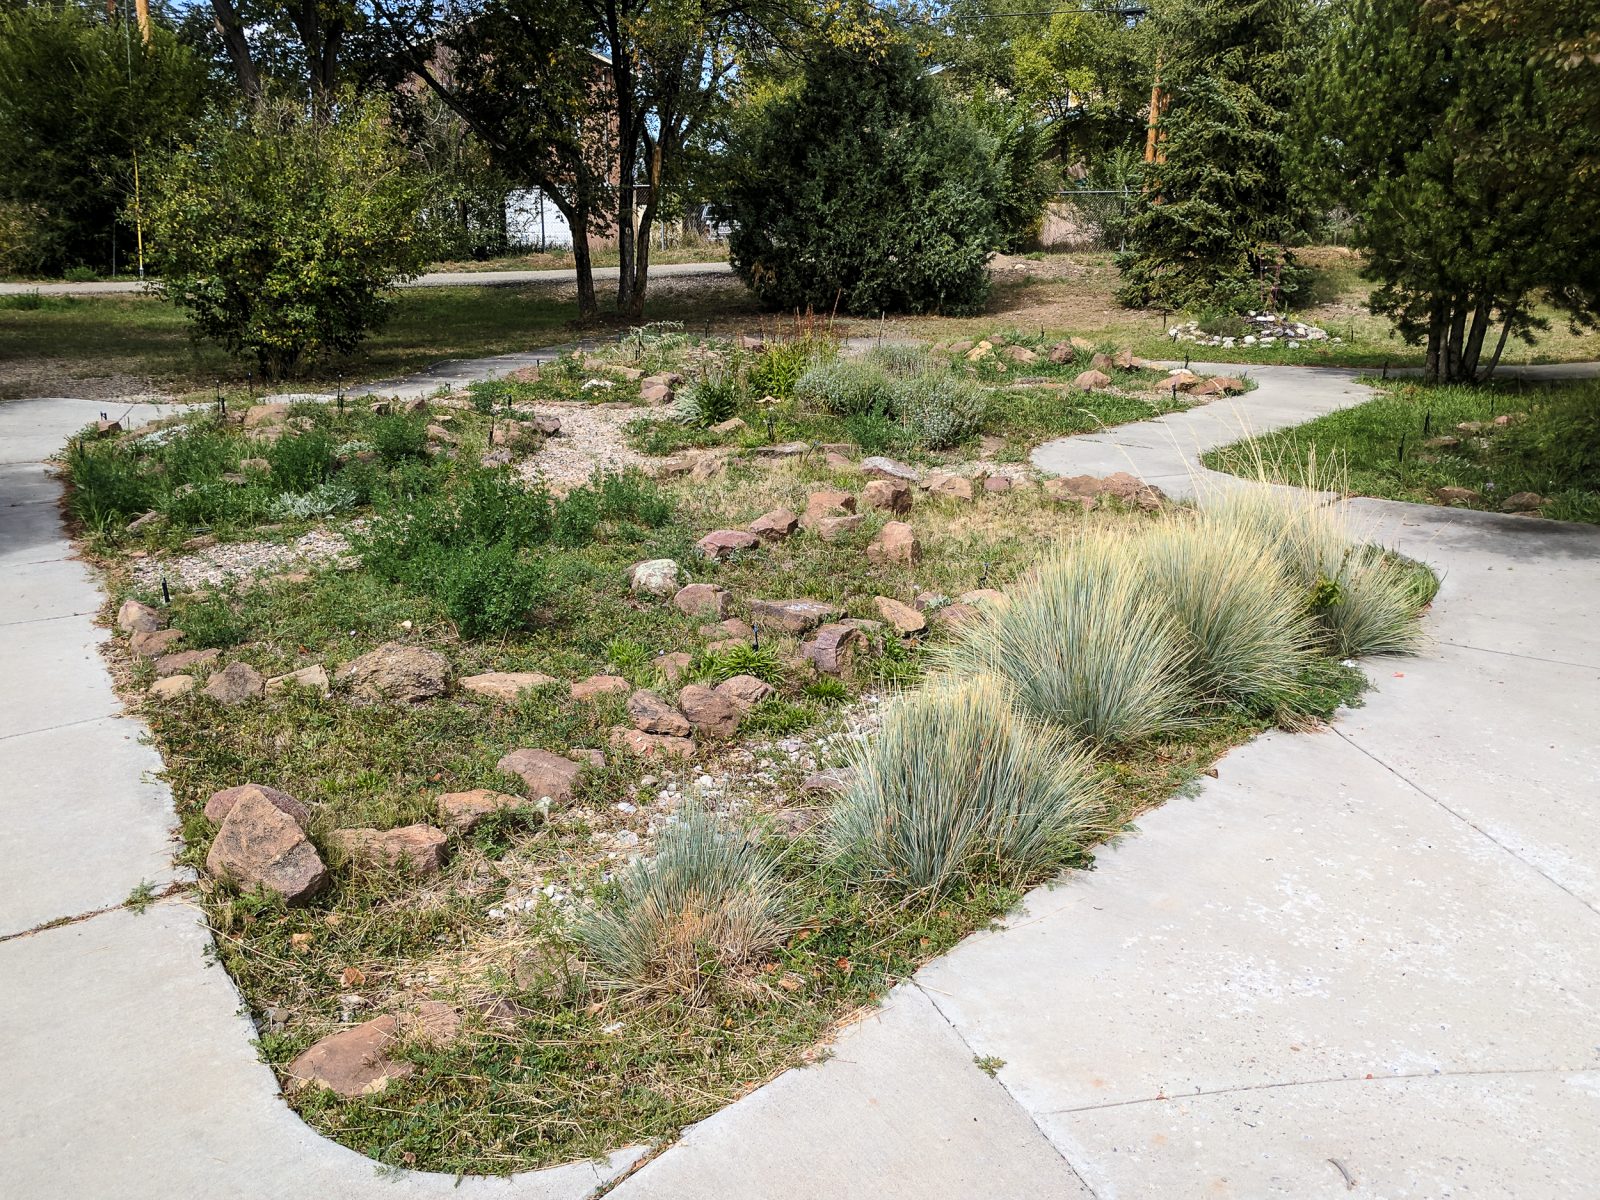 Before Dan's landscape design consultation, the courtyard was an uninspired mess of rocks and weeds